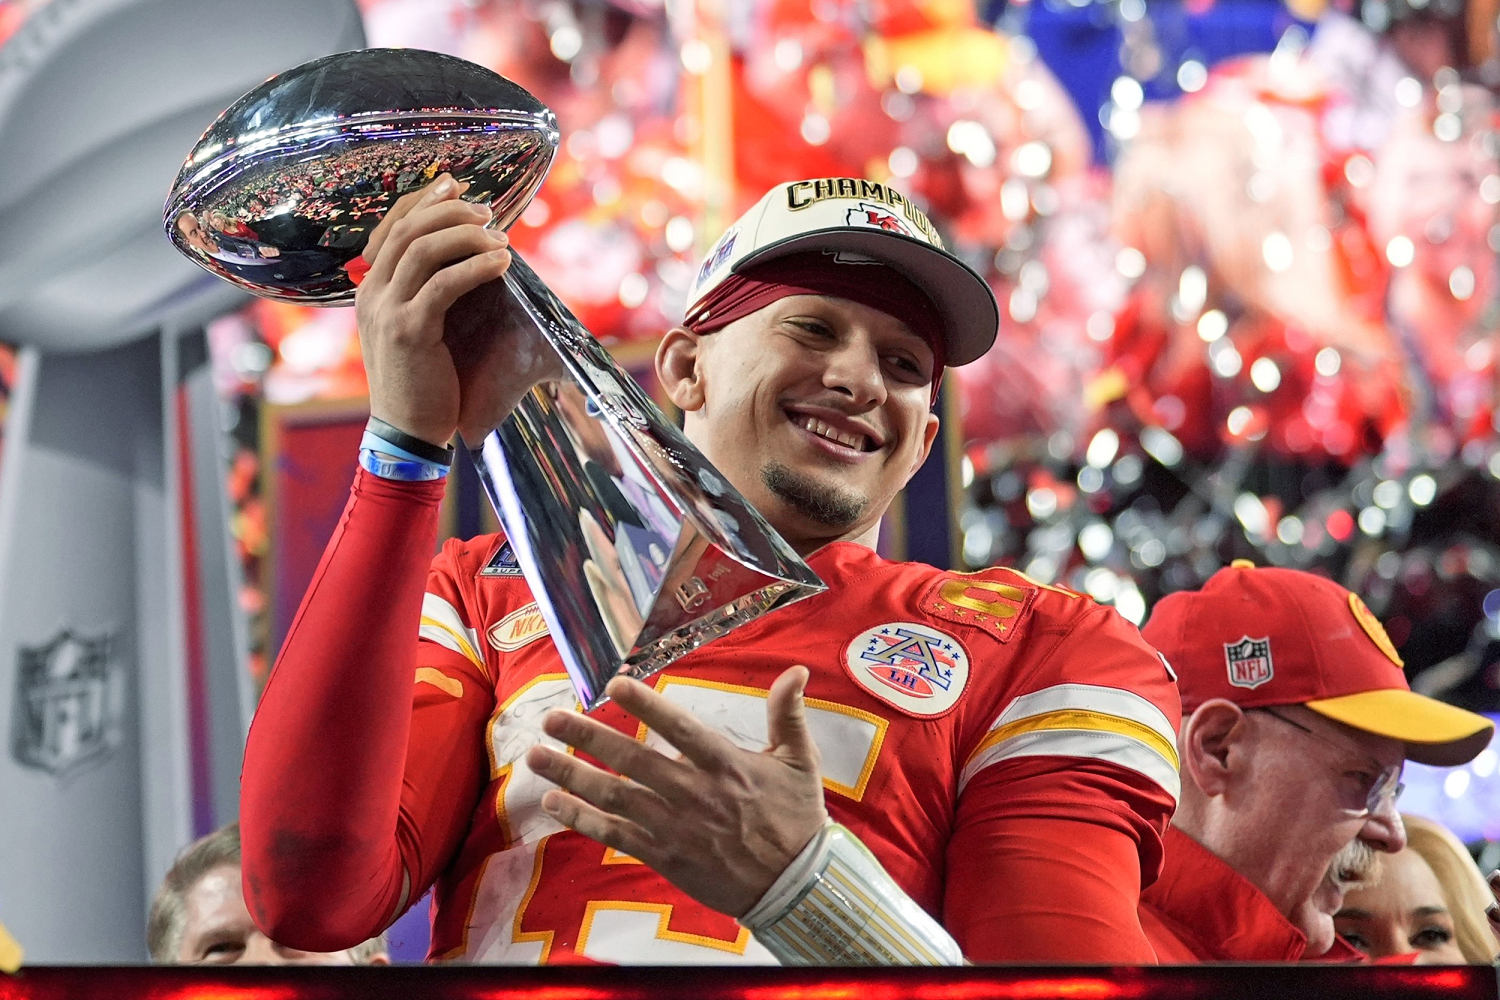 Kansas City Chiefs win Super Bowl for second year in a row